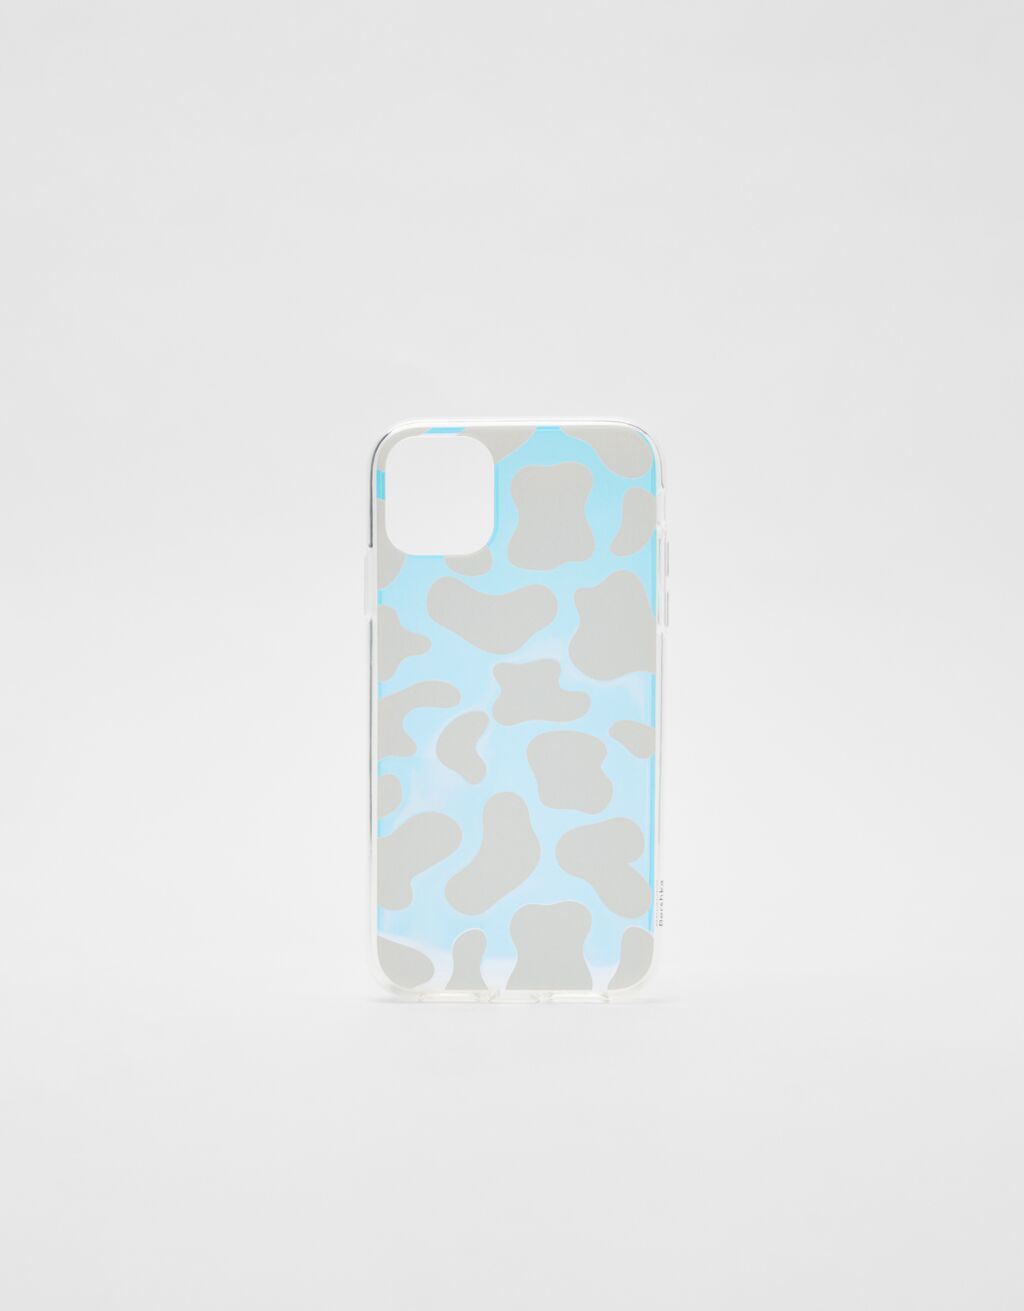 Mobile phone case with iridescent design and cow print